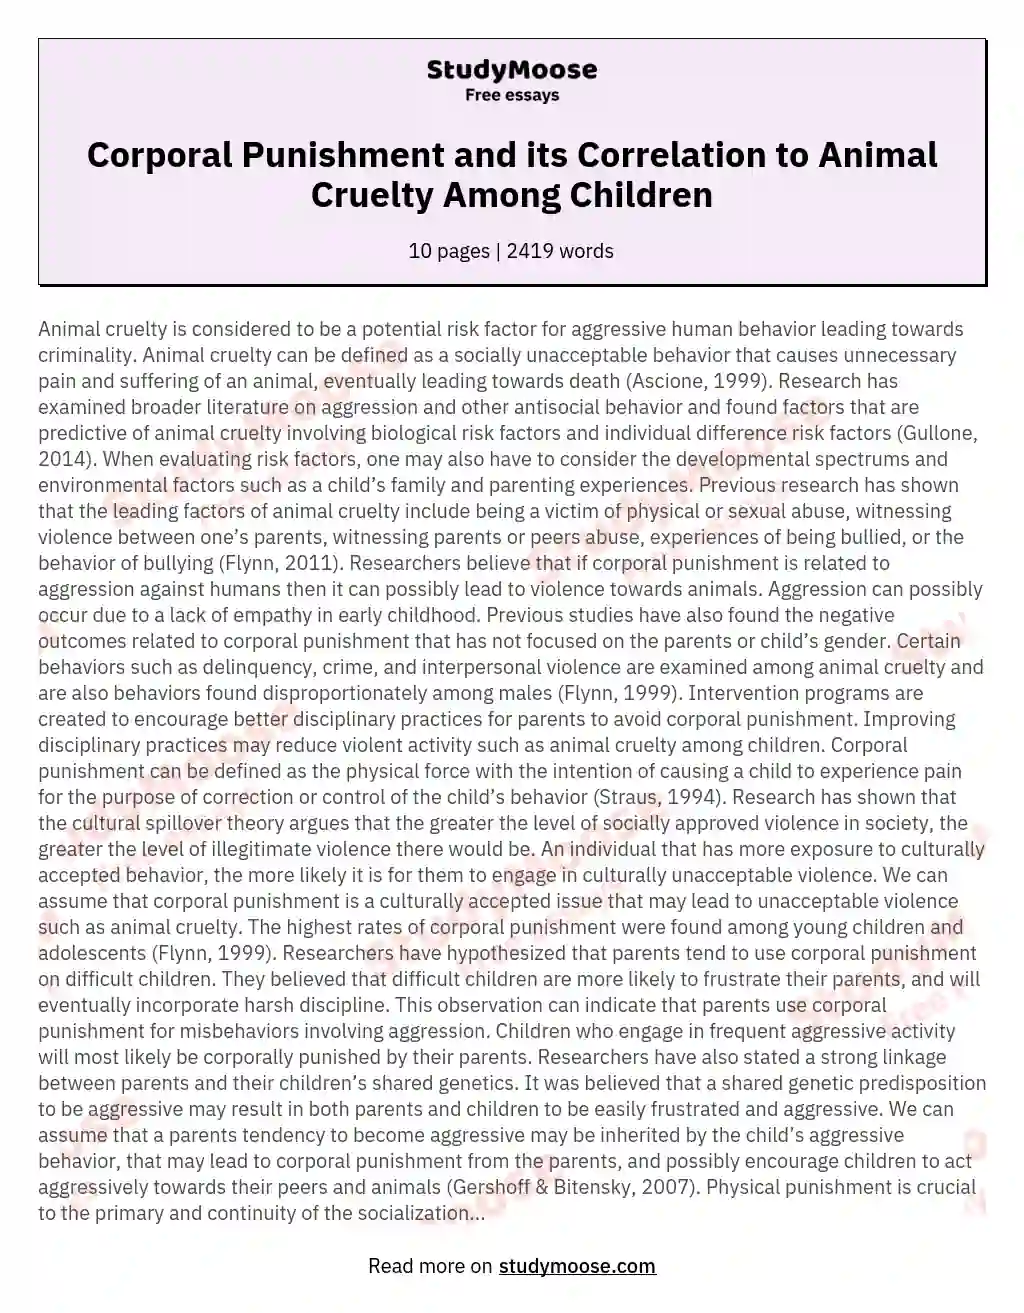 Corporal Punishment and its Correlation to Animal Cruelty Among Children